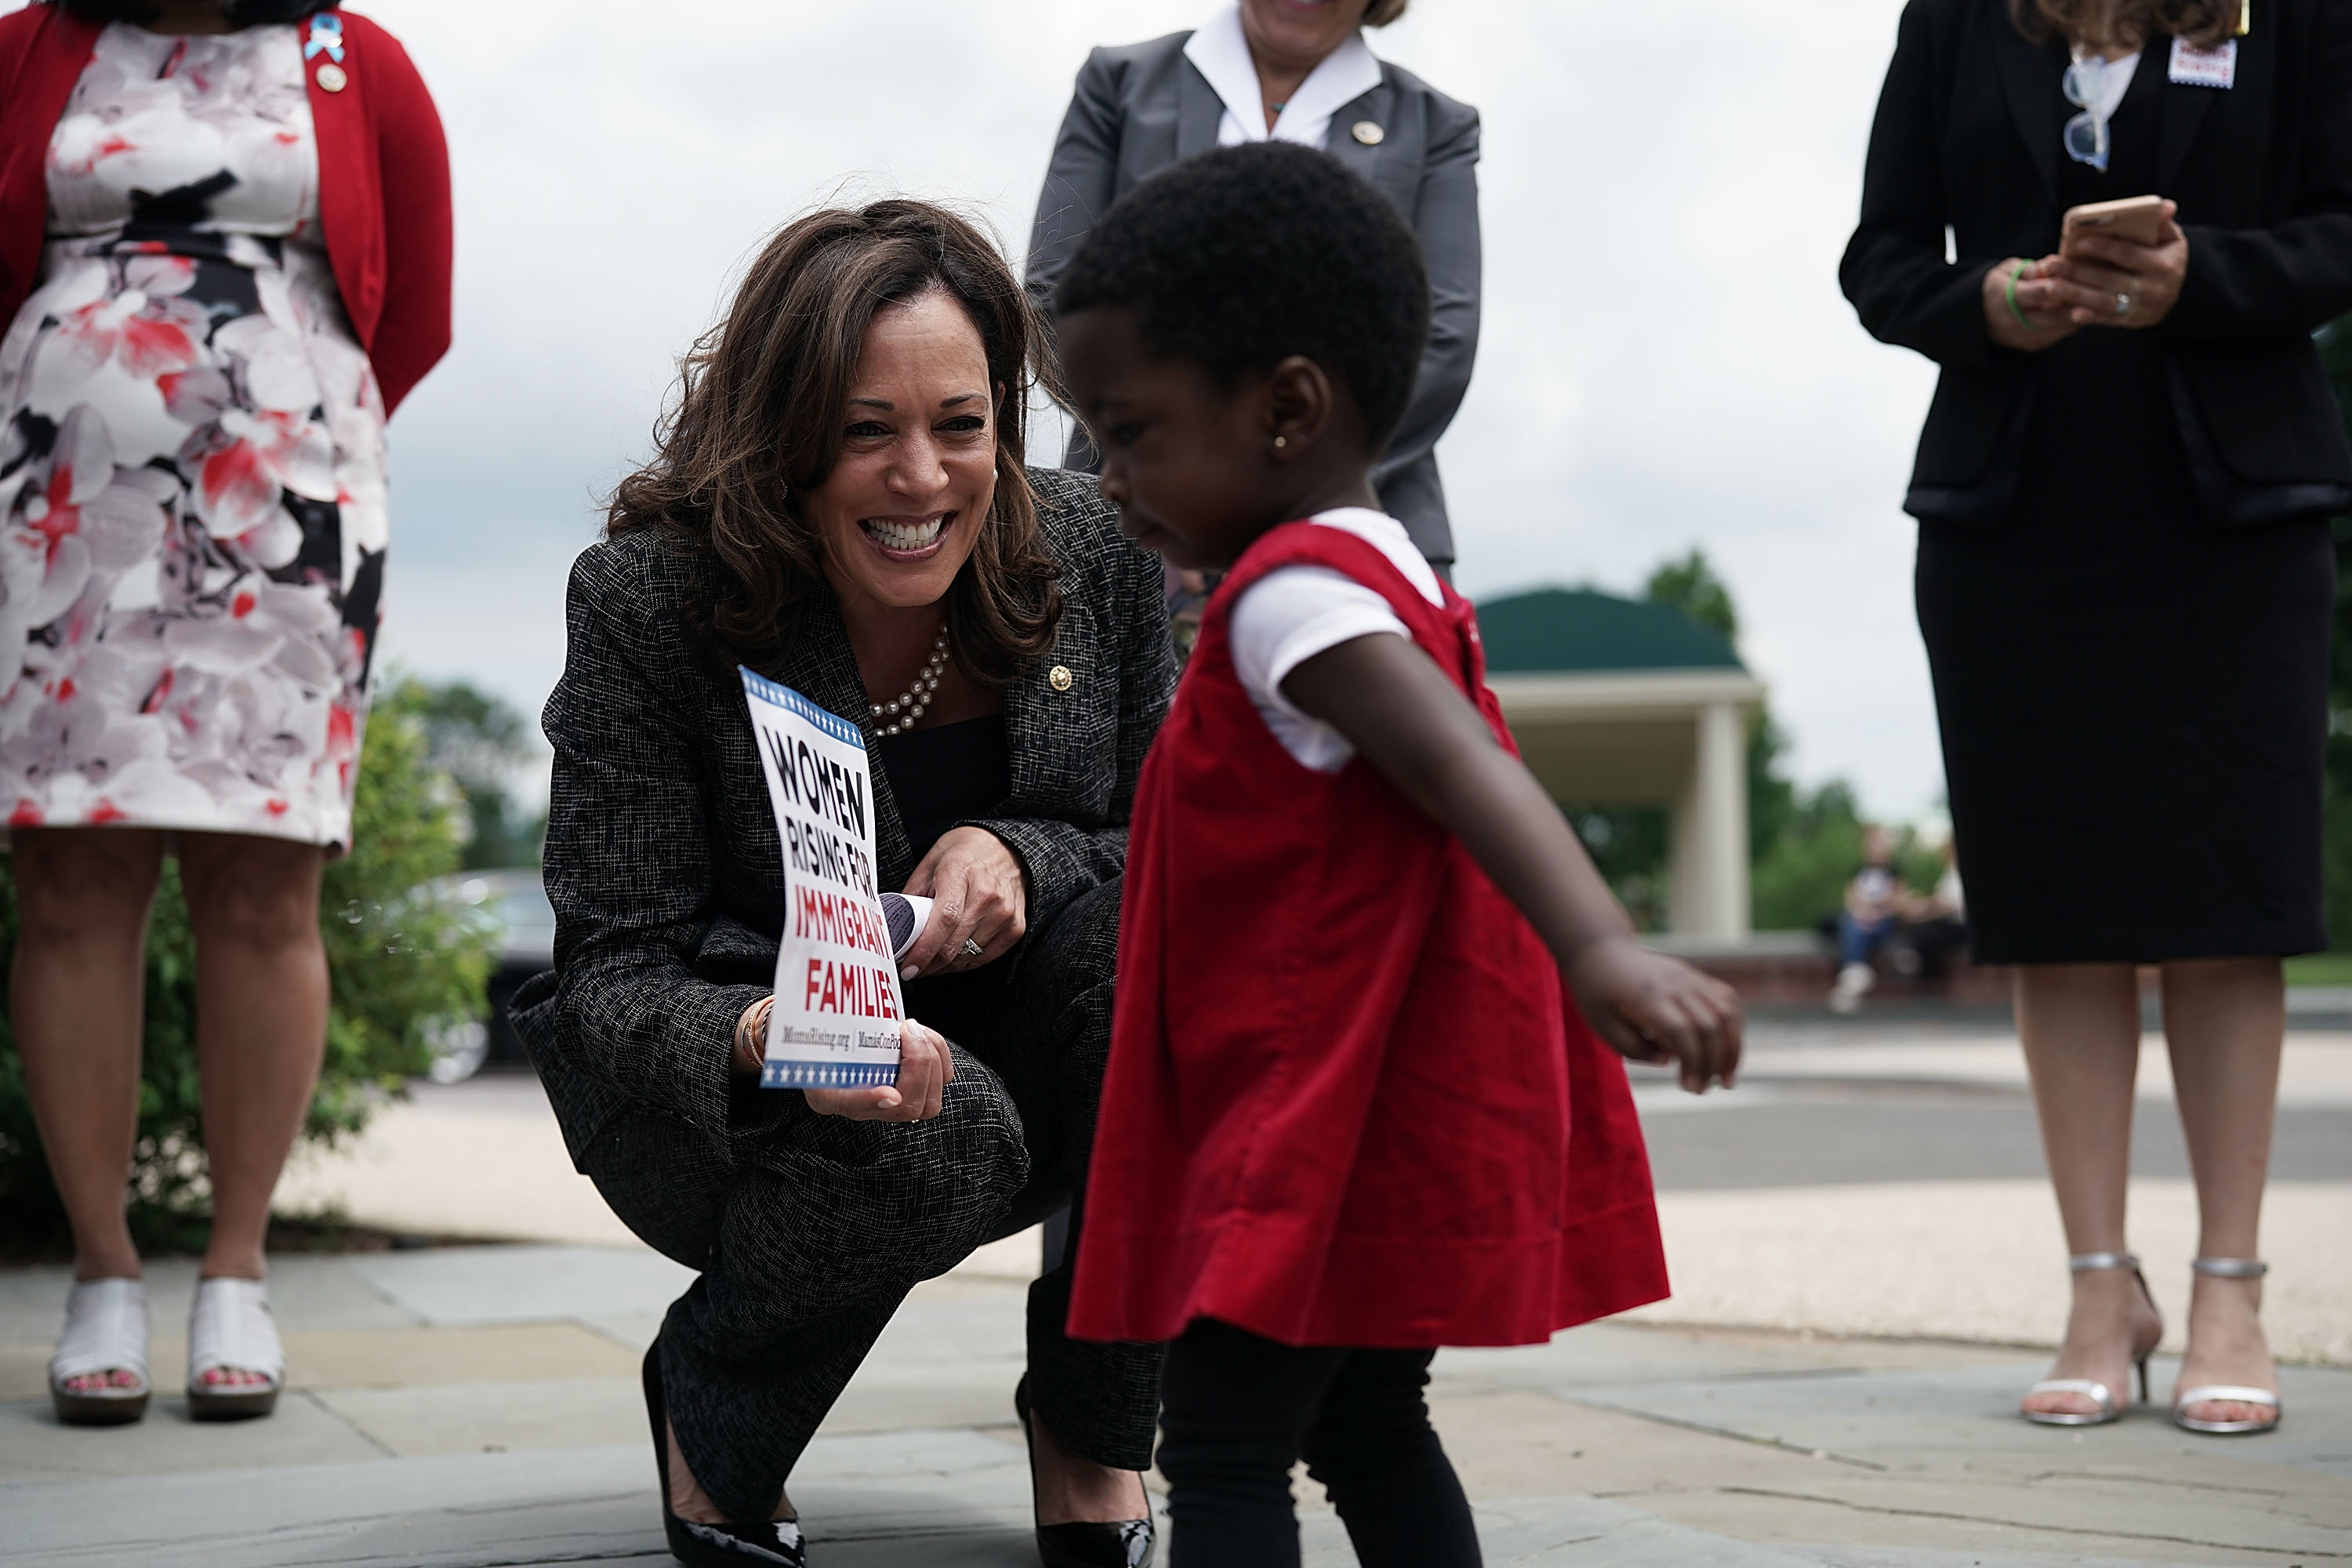 Senator Kamala Harris crouches down to smile at a toddler during a news conference.